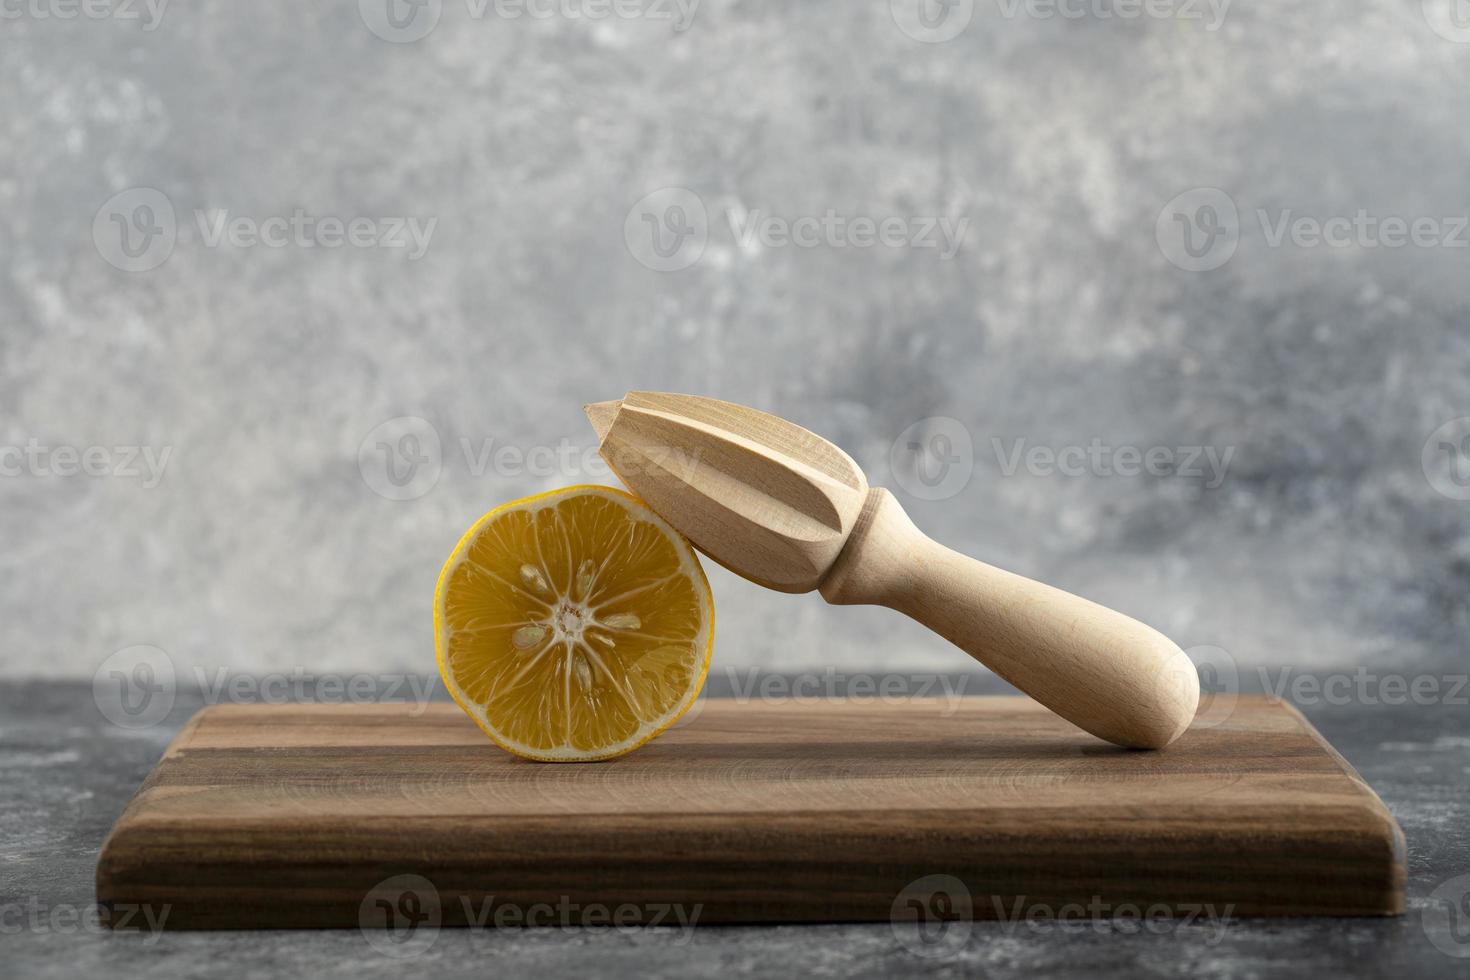 Sliced lemon with a wooden reamer on a wooden board photo